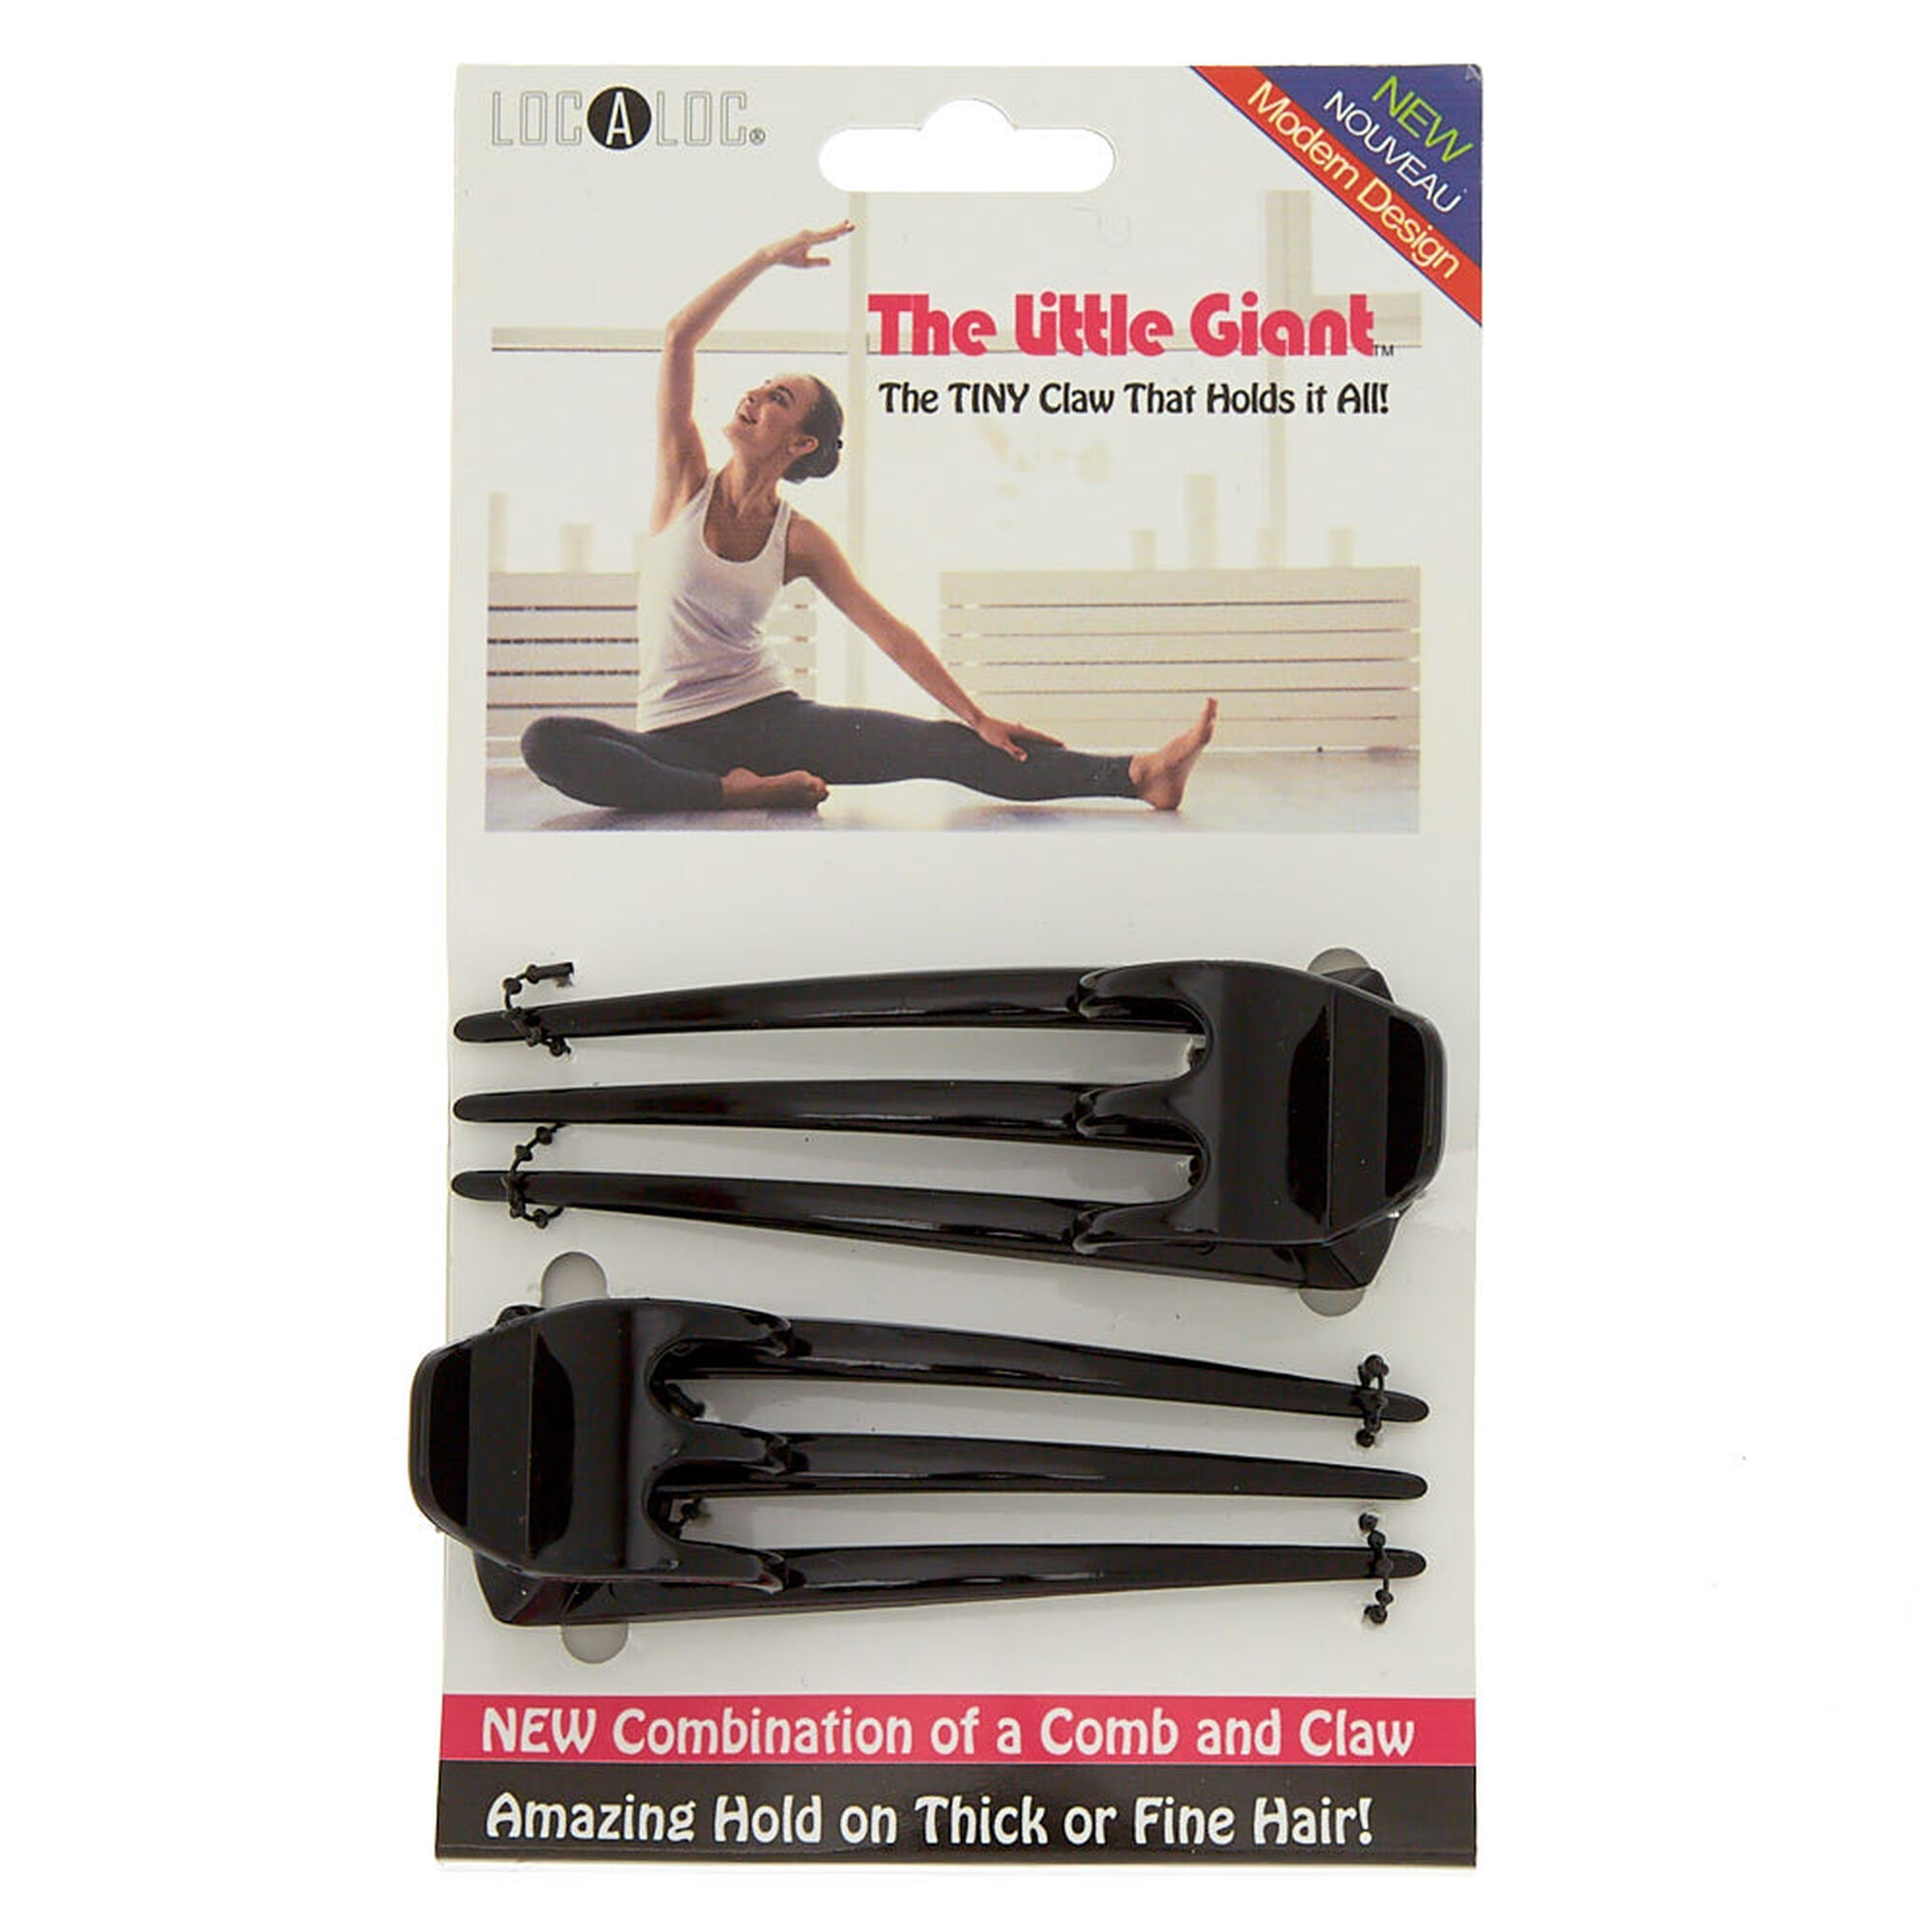 View Claires Loc A The Little Giant Claw 2 Pack information